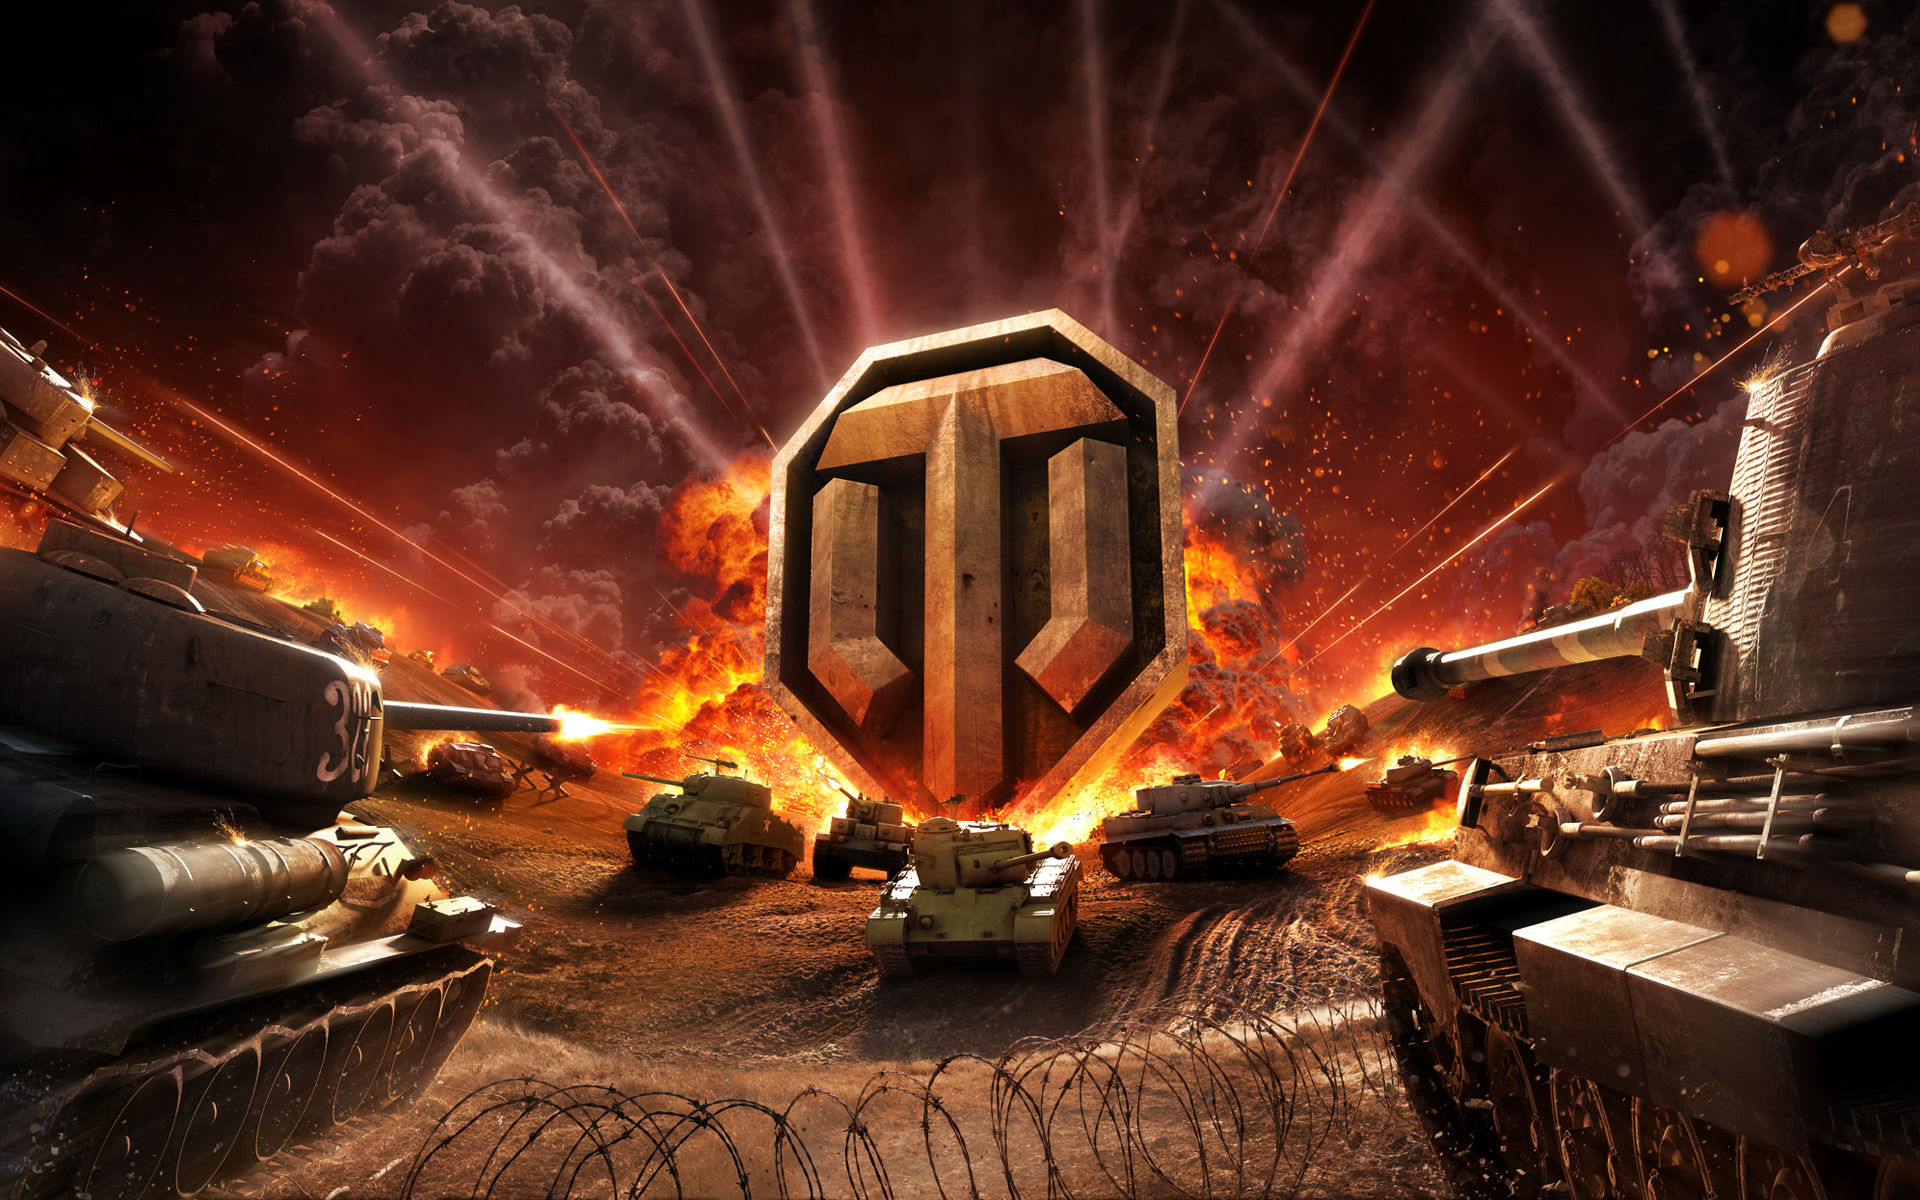 World Of Tanks Online - Wallpaper, High Definition, High Quality ...